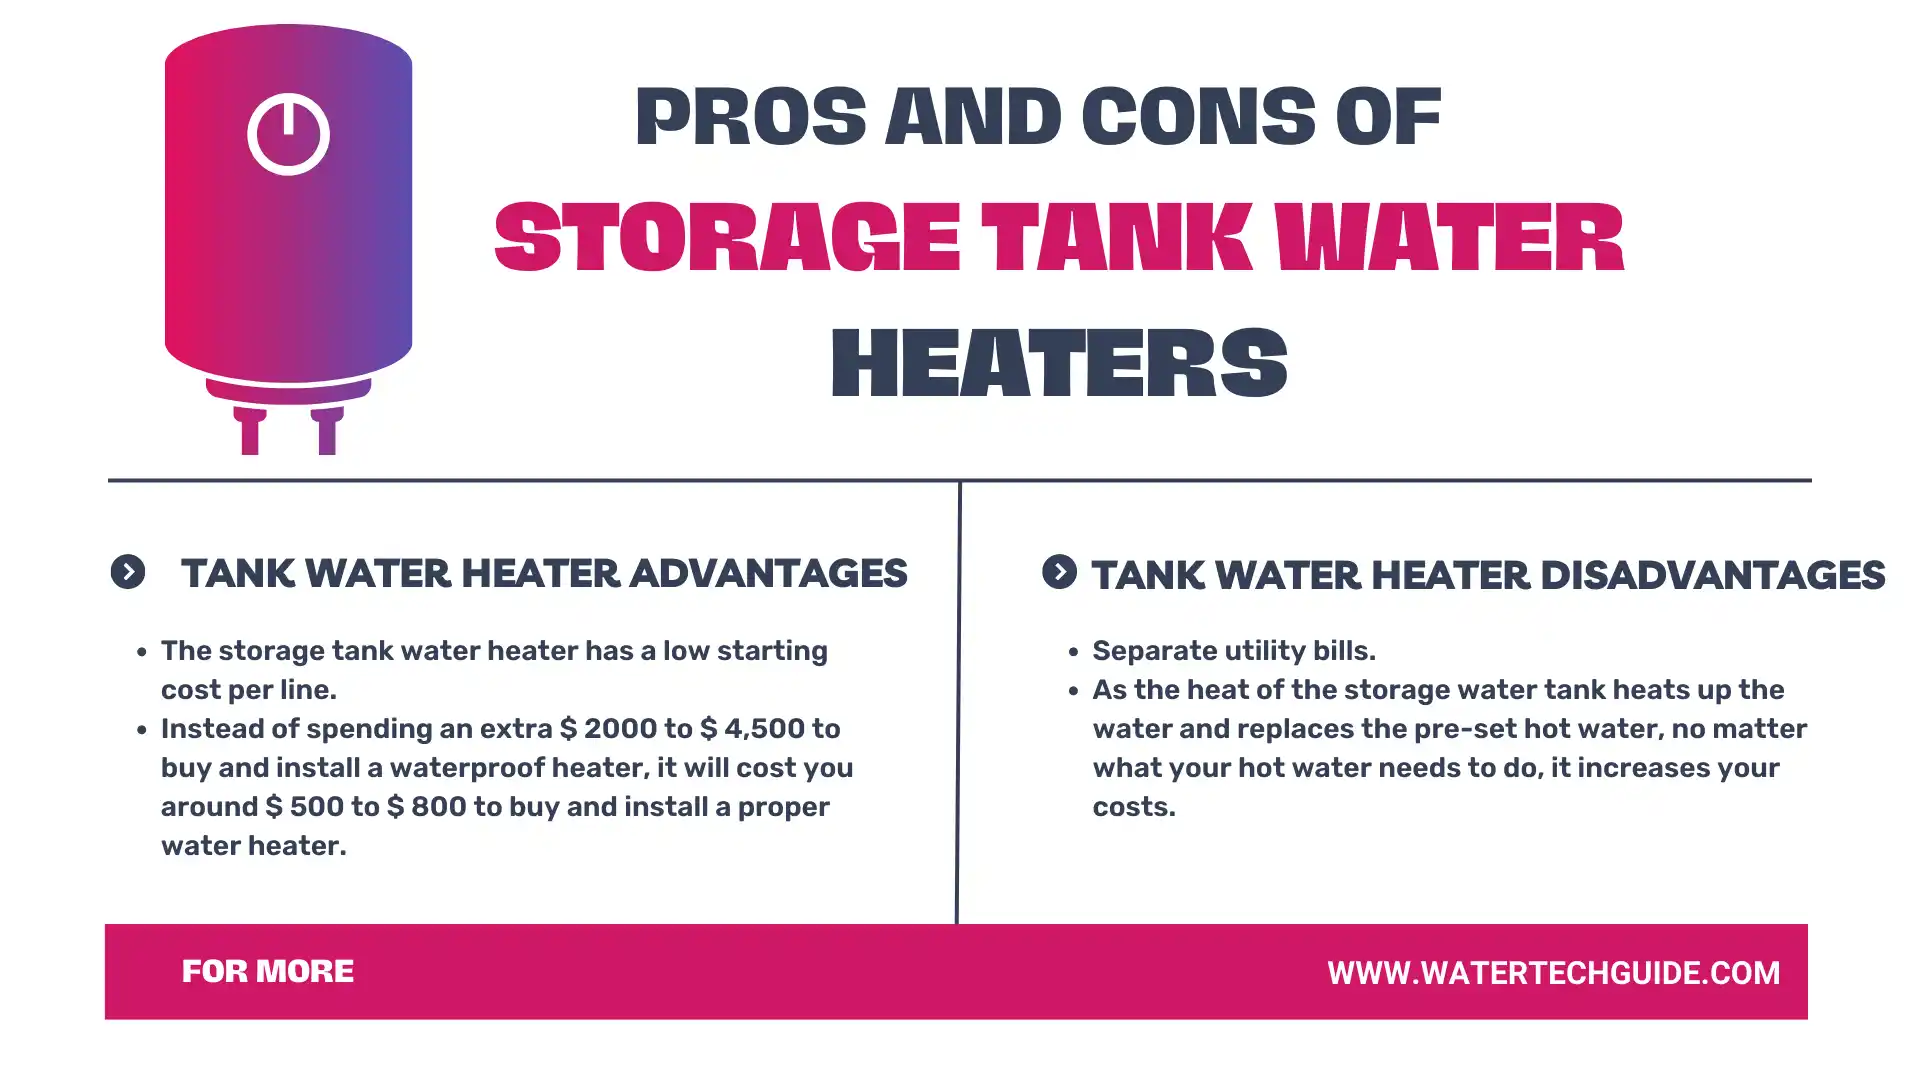 Pros & Cons of Storage Tank Water Heaters